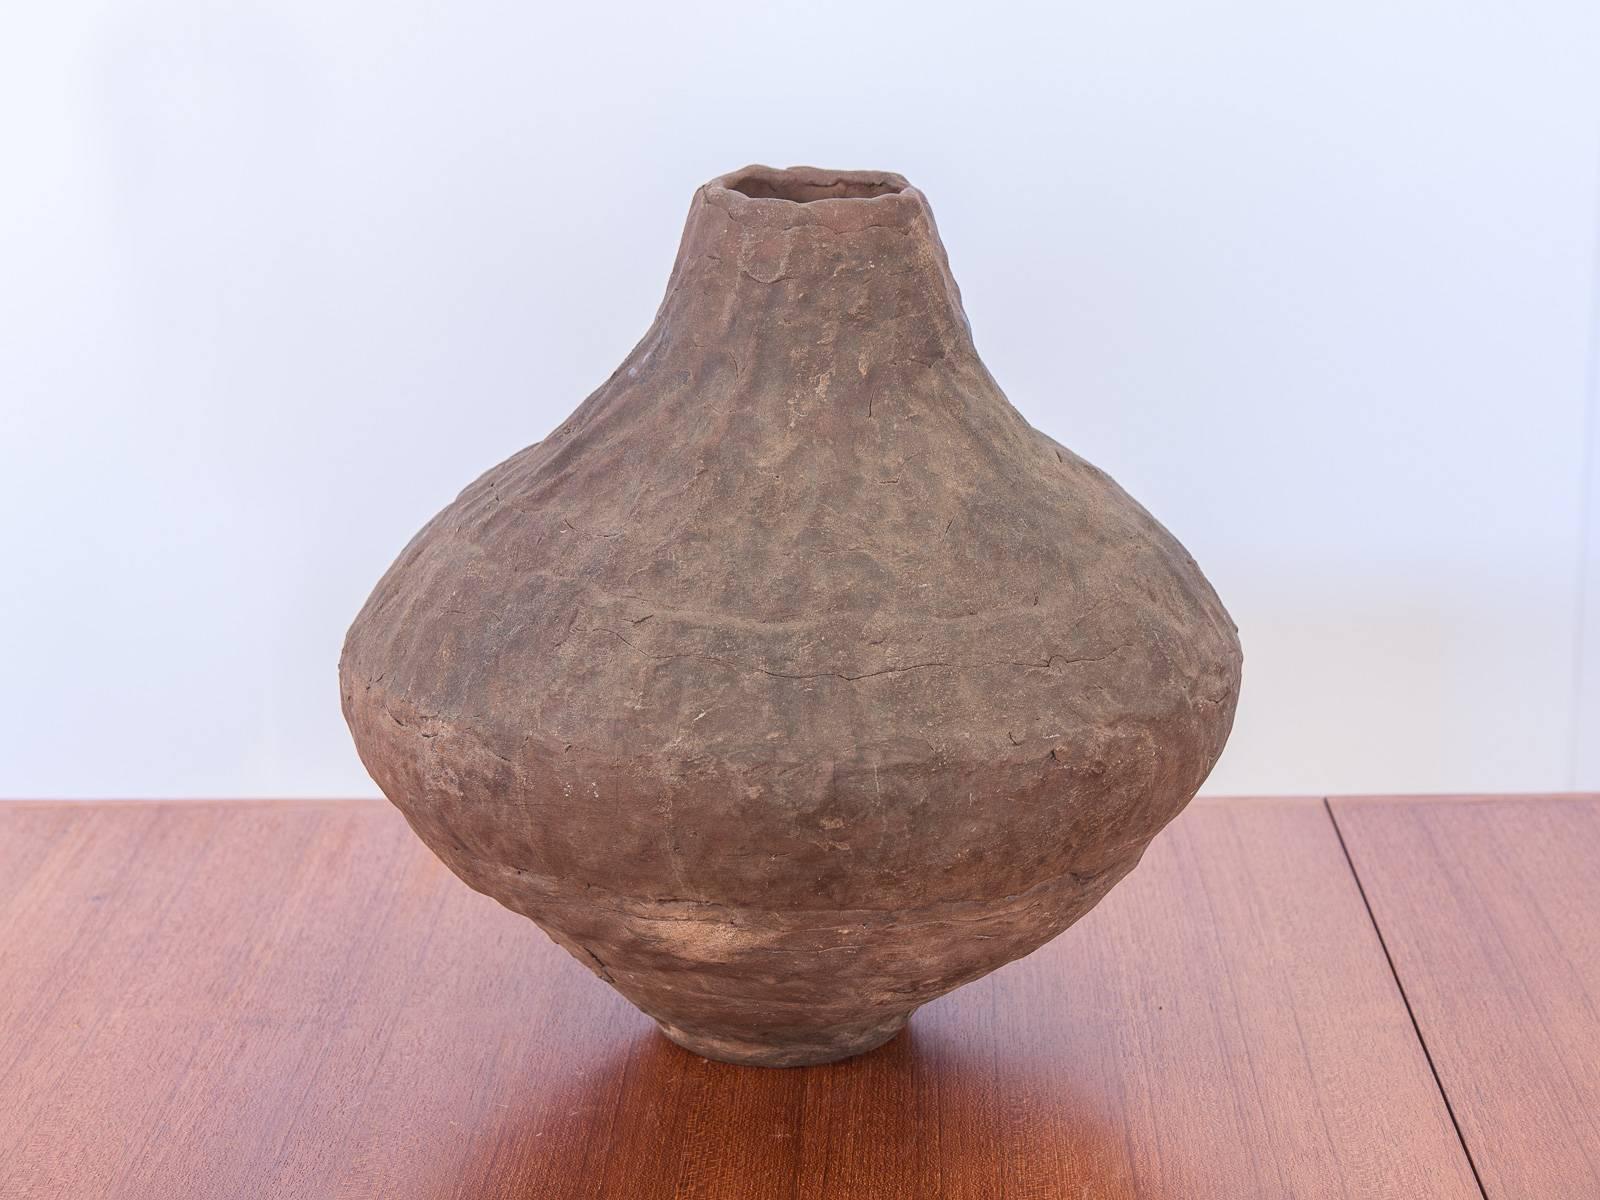 Organic, ceramic art pottery vase. Excellent vintage condition. Coil vase form echoes the indentations of the hands that built it. Pair it with some clean, modernist forms to compliment its natural, earthy presence.